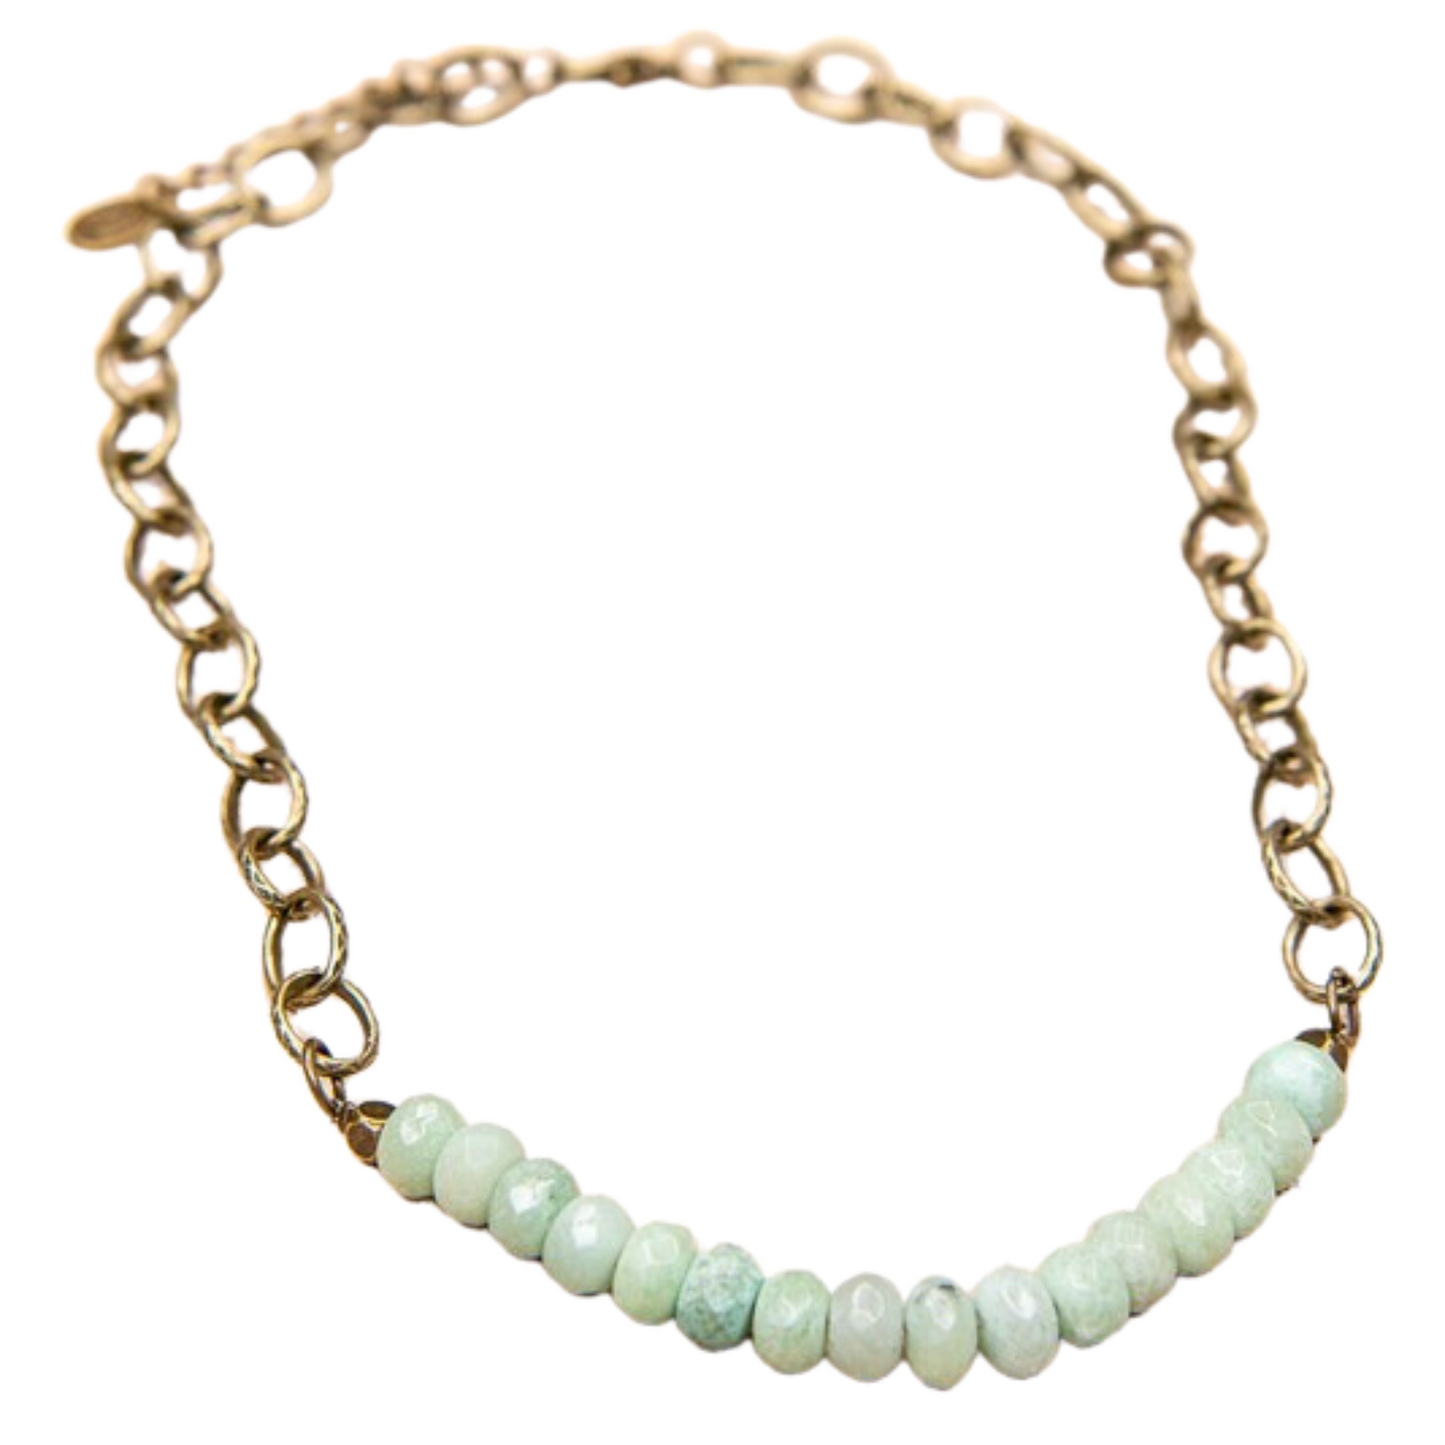 This elegant Victoria Necklace is an eye-catching accessory for any special occasion. Crafted with a golden hue and adorned with light blue beads, this short necklace is sure to become your new favorite.